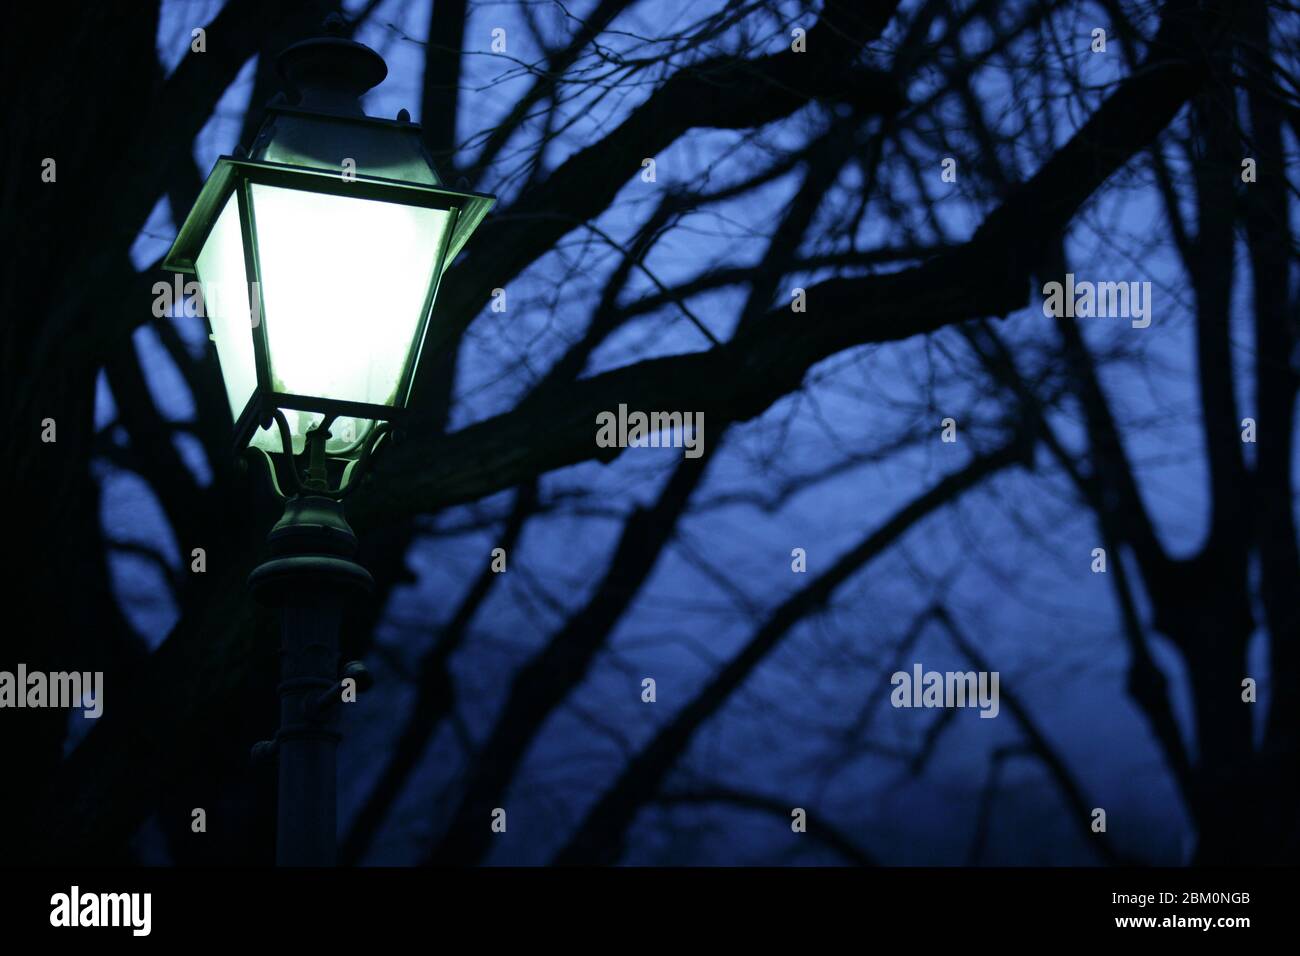 Old fashioned street lamp in the twilight with branches in the background Stock Photo